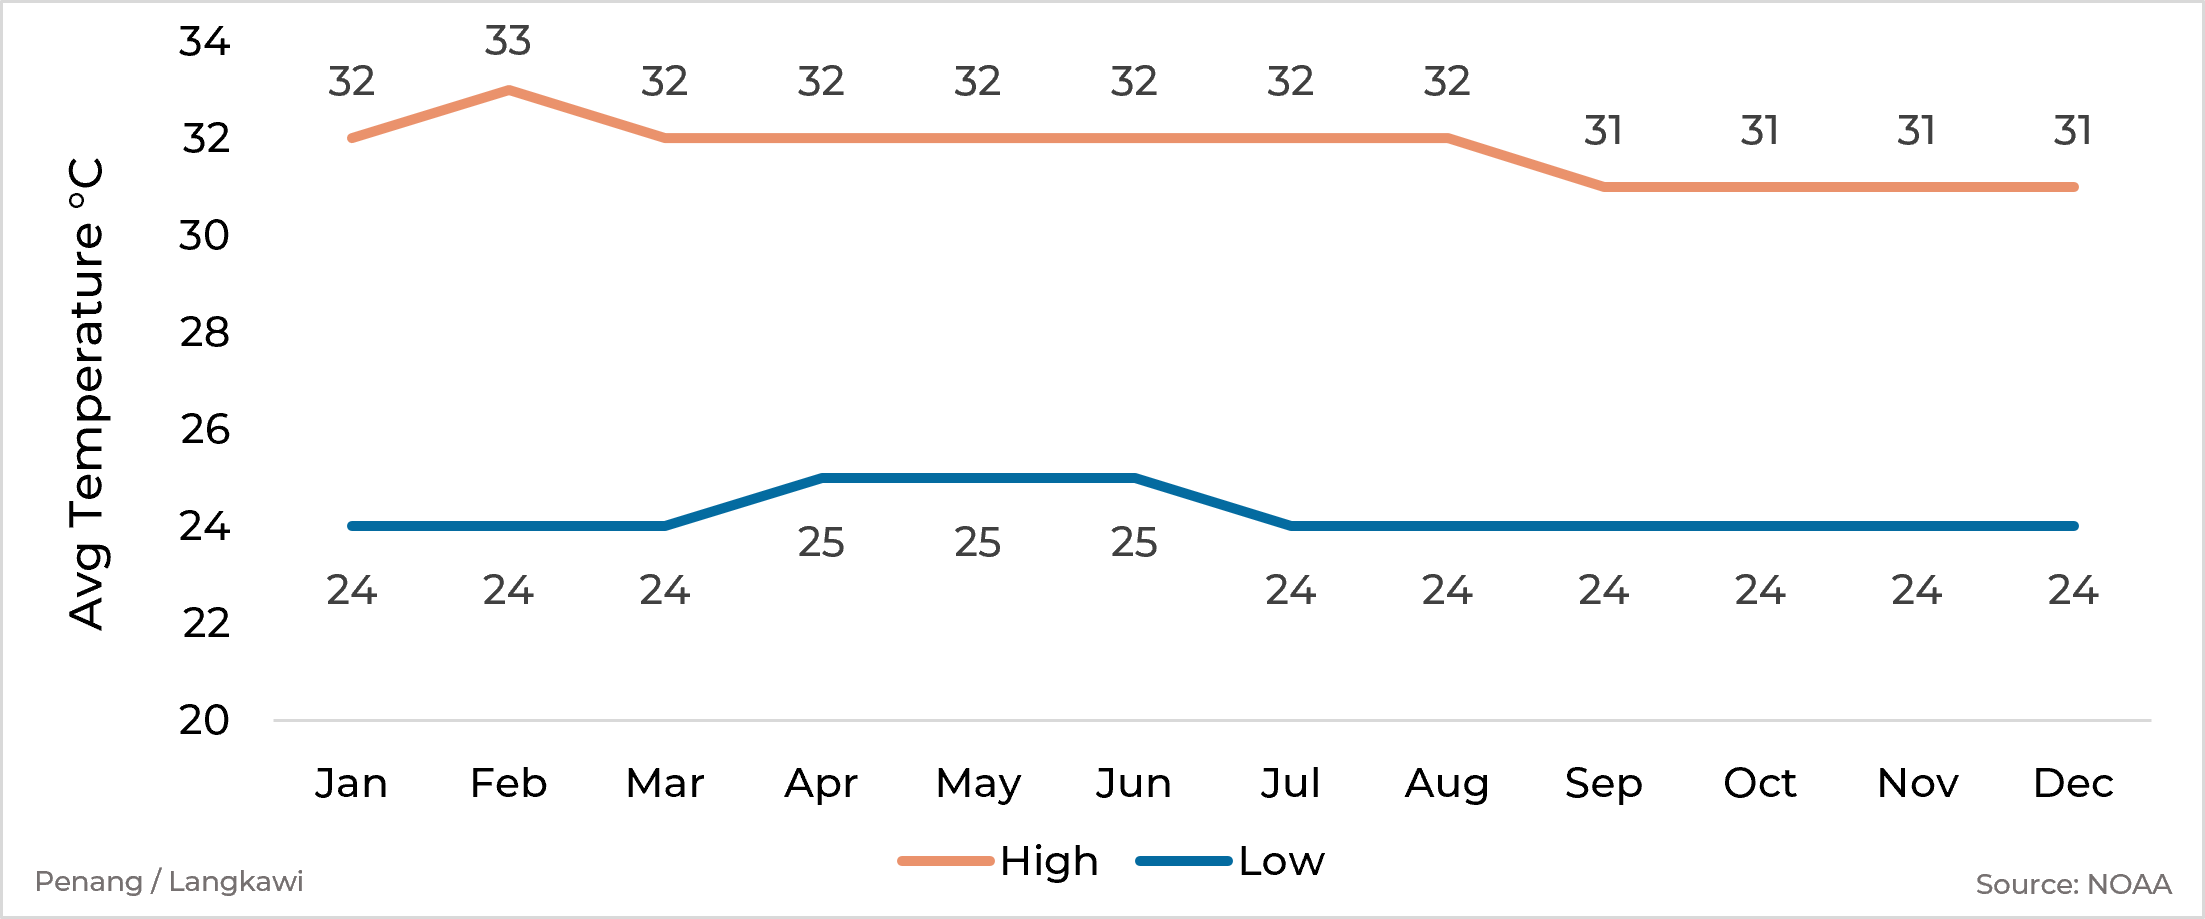 Graph showing average high and low temperature by month for Penang & Langkawi, Malaysia